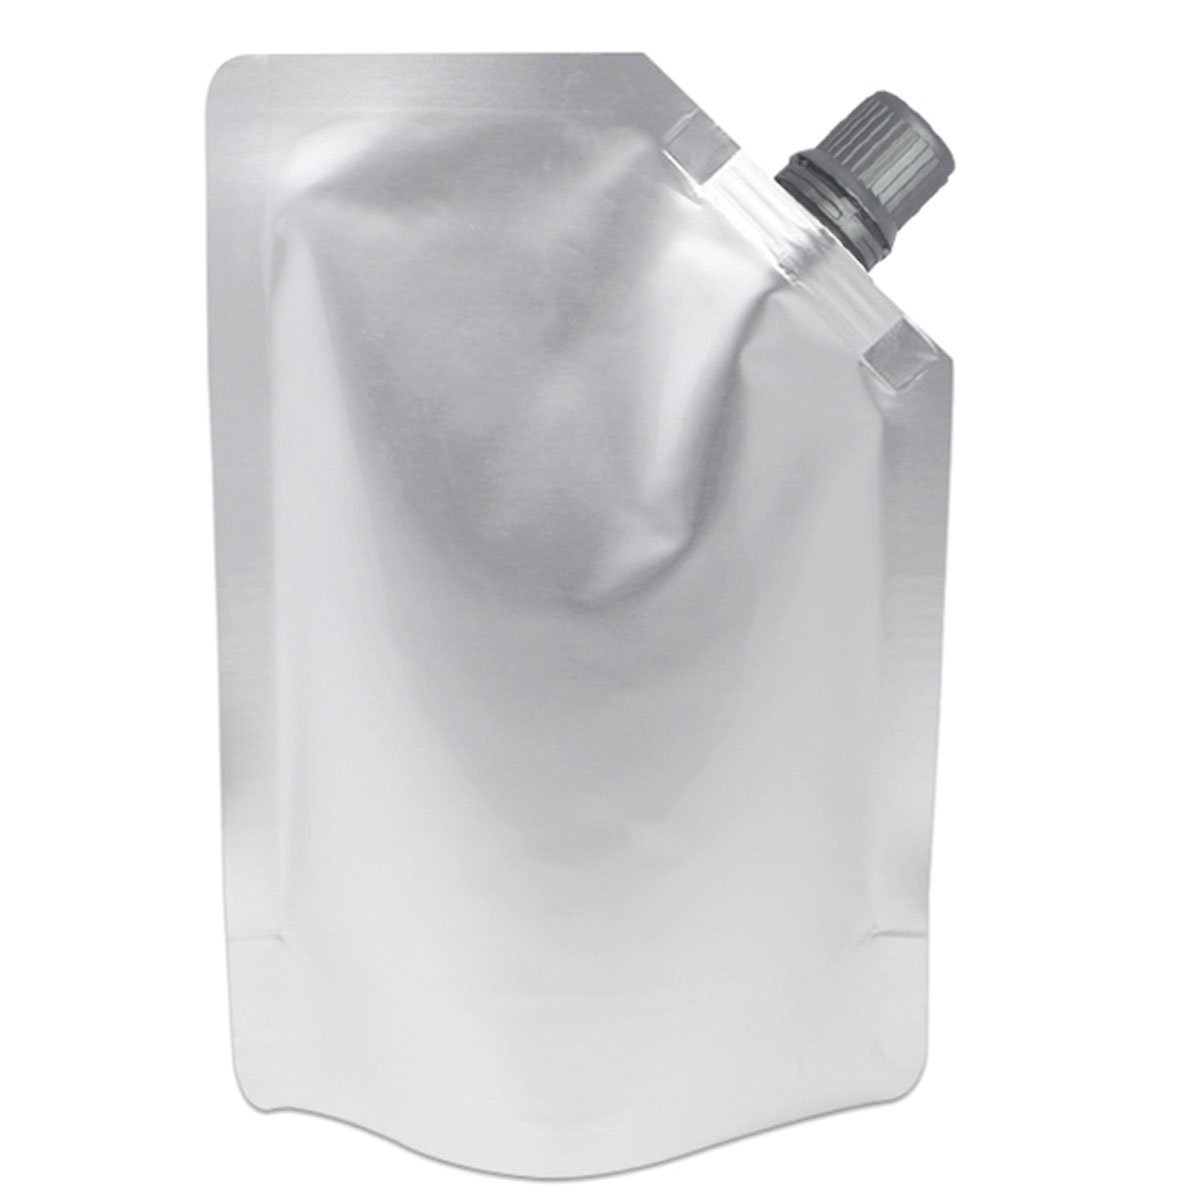 Corner Spout Pouch 10mm Neck - Filling From Cap